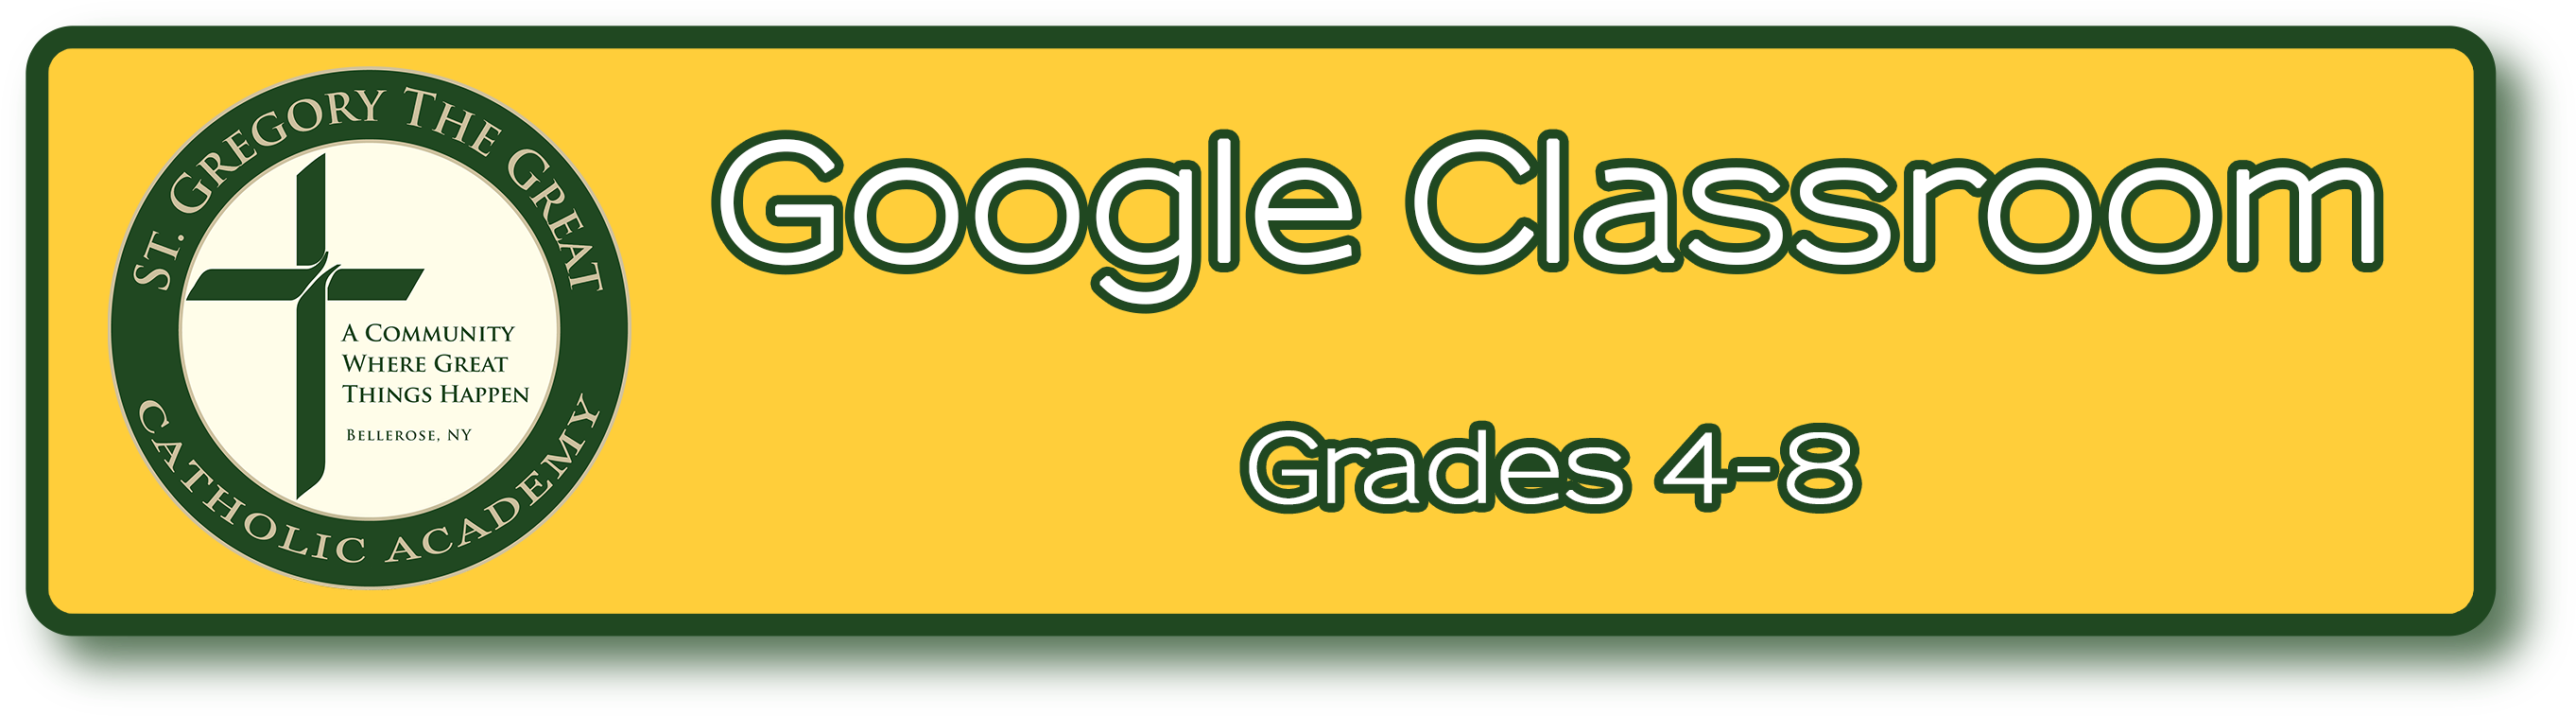 St Gregory Google Classroom Sign PNG